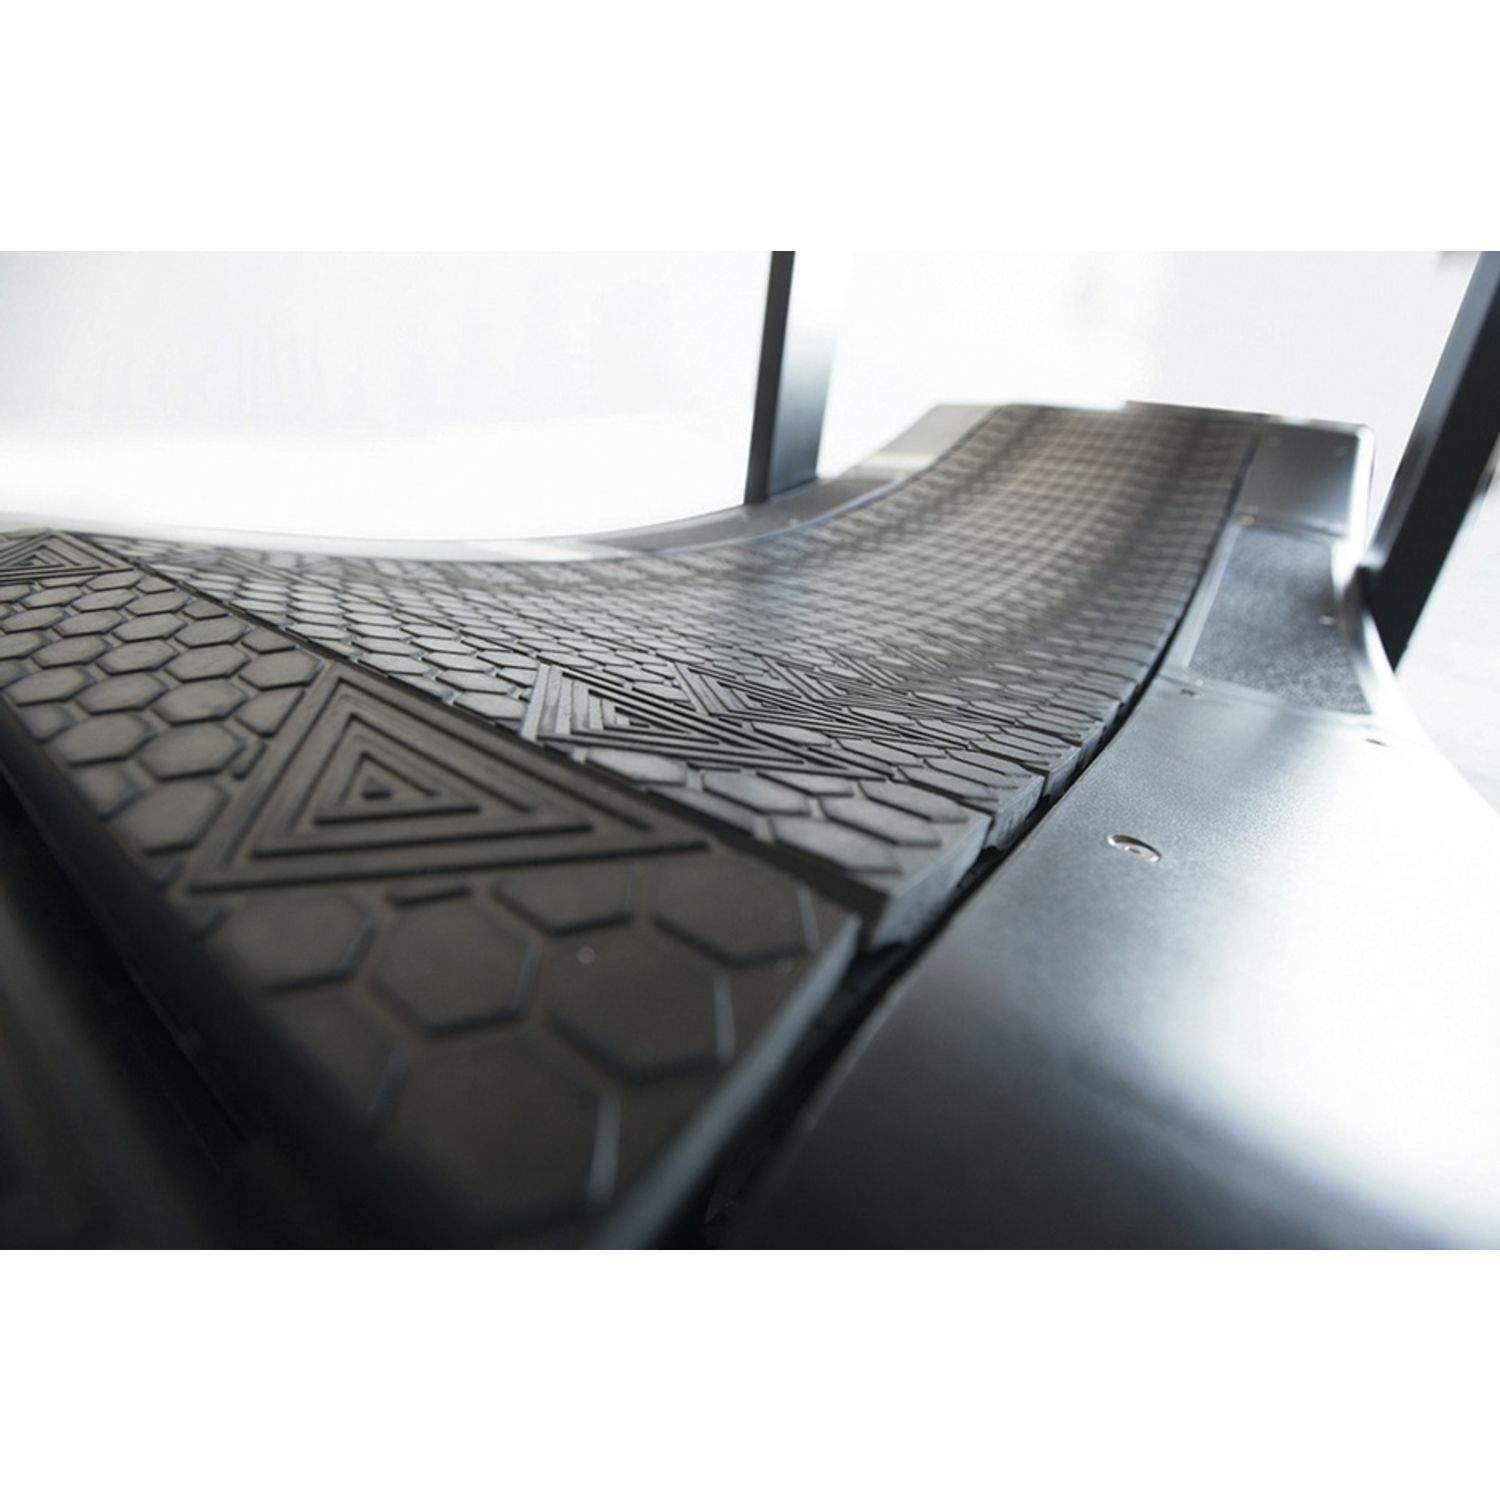 TAPIS ROULLANT TOORX FORCE CROSS MAGNETICO PROFESSIONALE